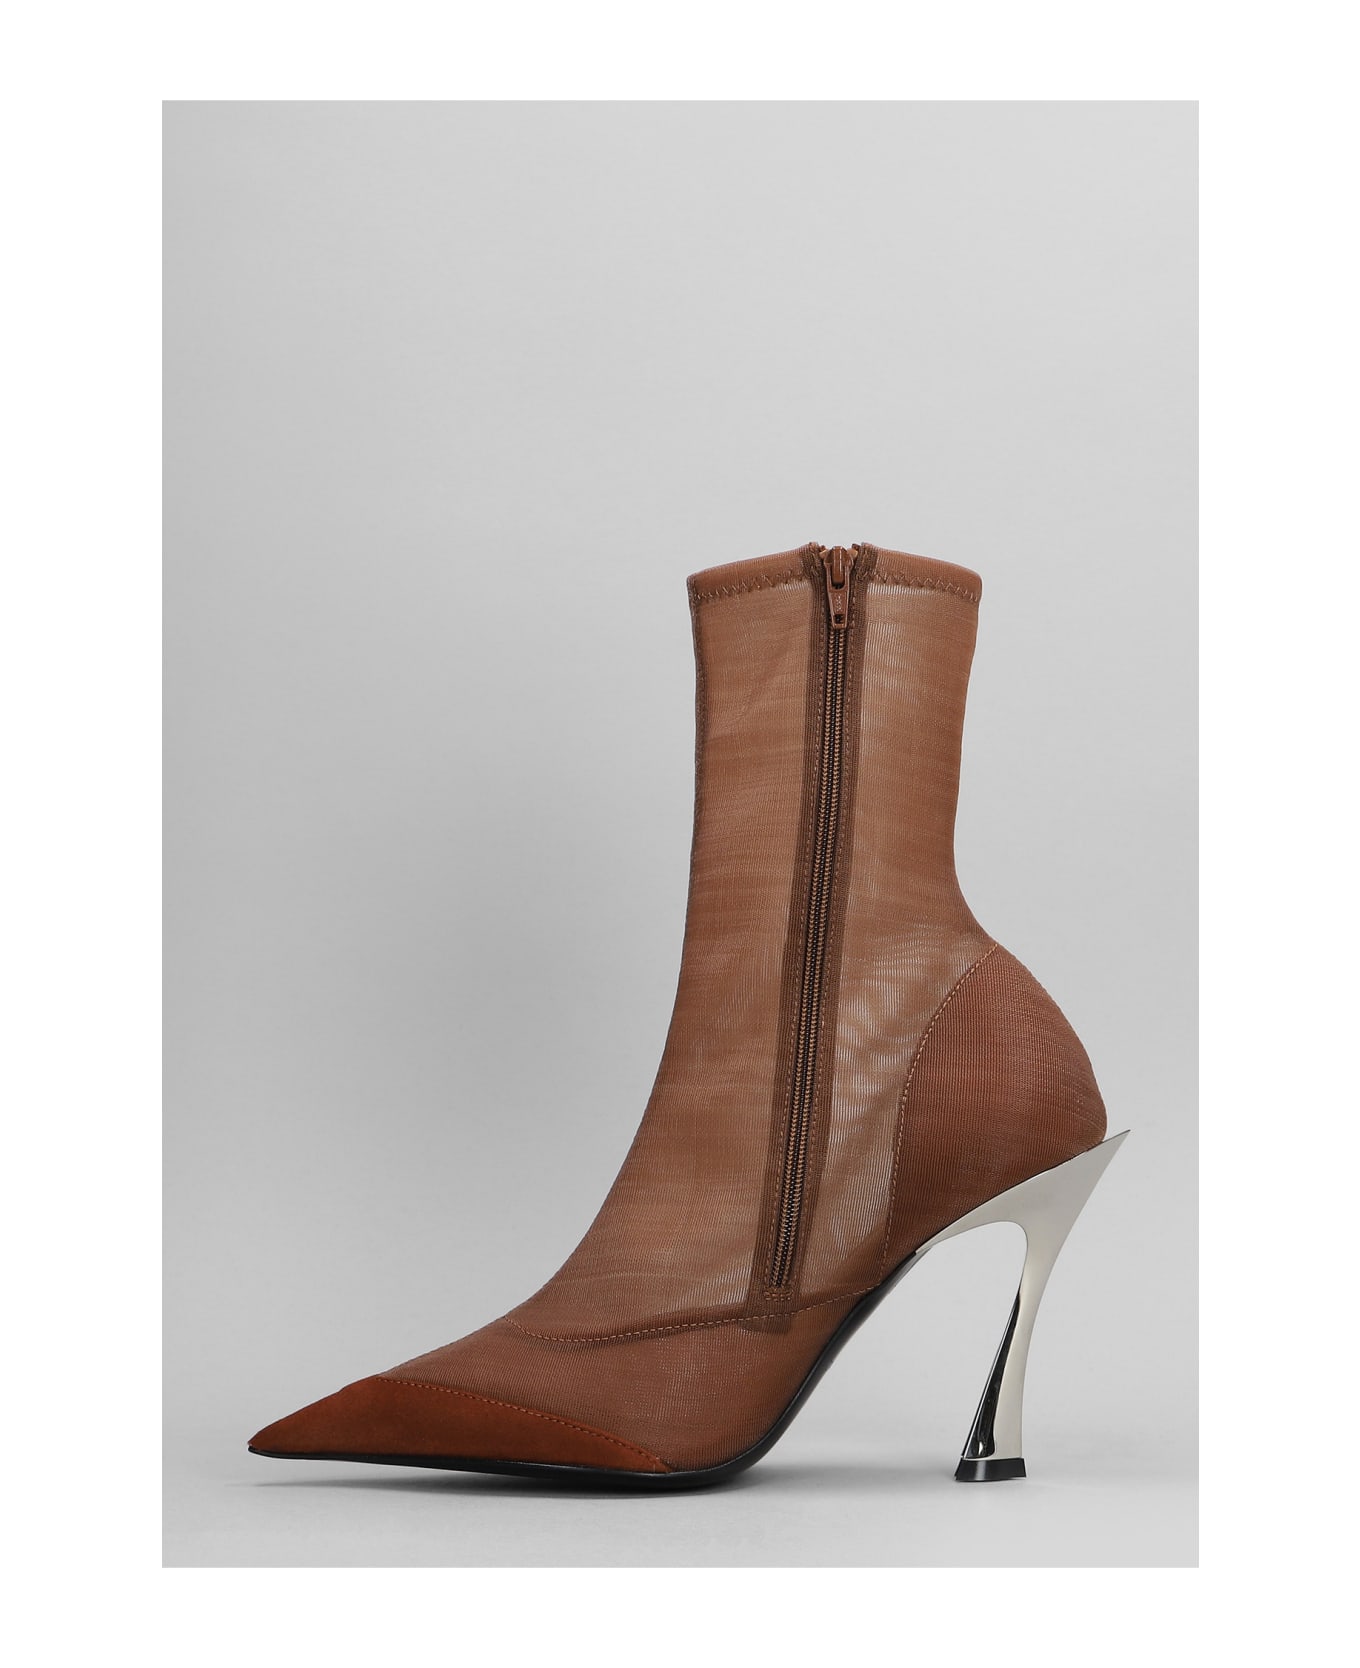 Mugler High Heels Ankle Boots In Leather Color Nylon - leather color